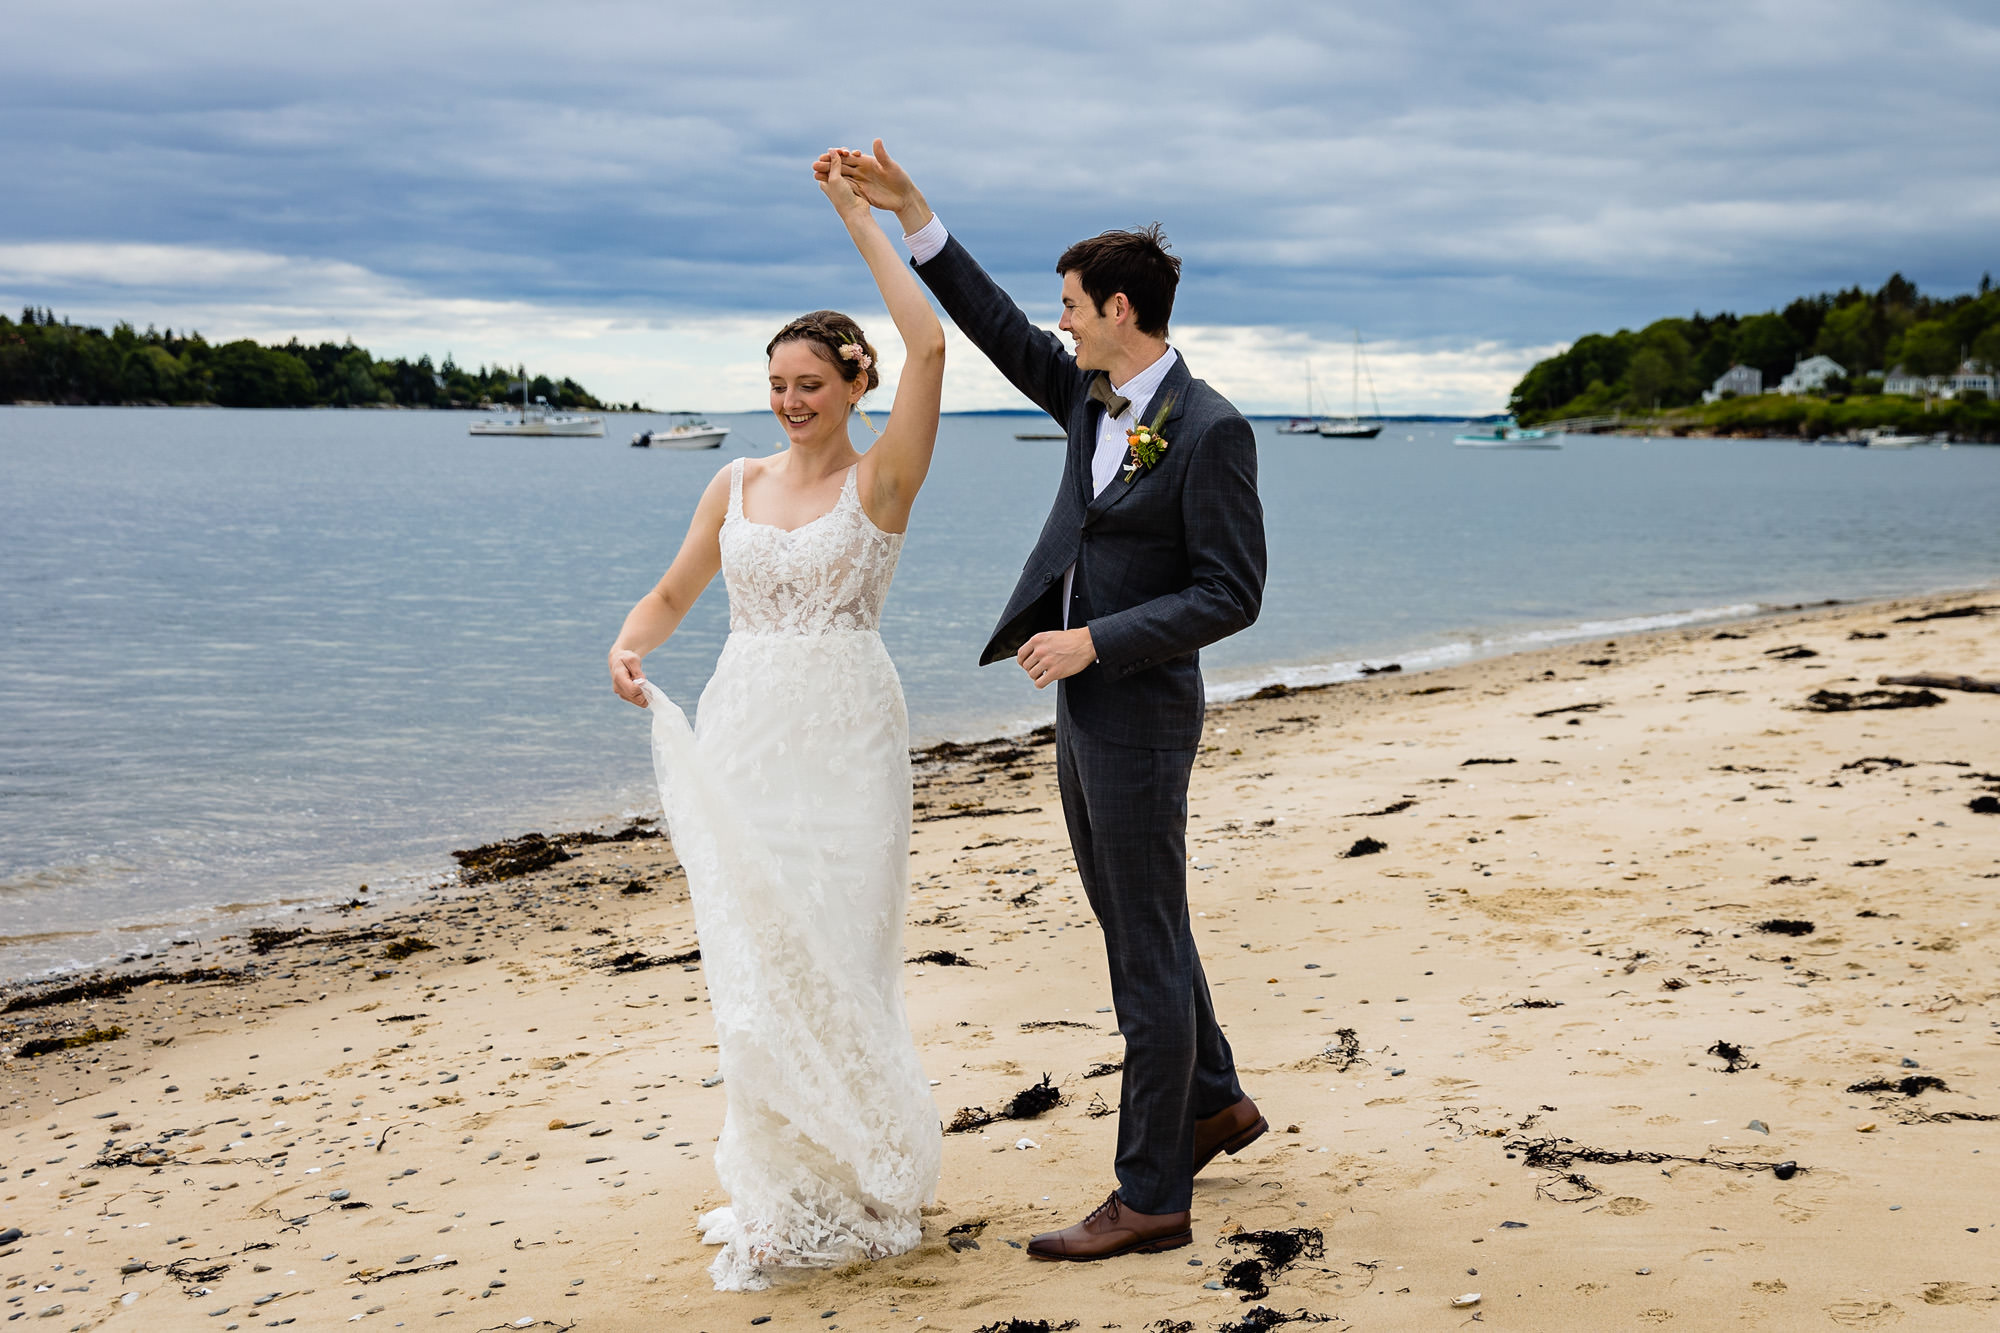 A stunning first look prior to a wedding on a beach on Chebeague Island, Maine